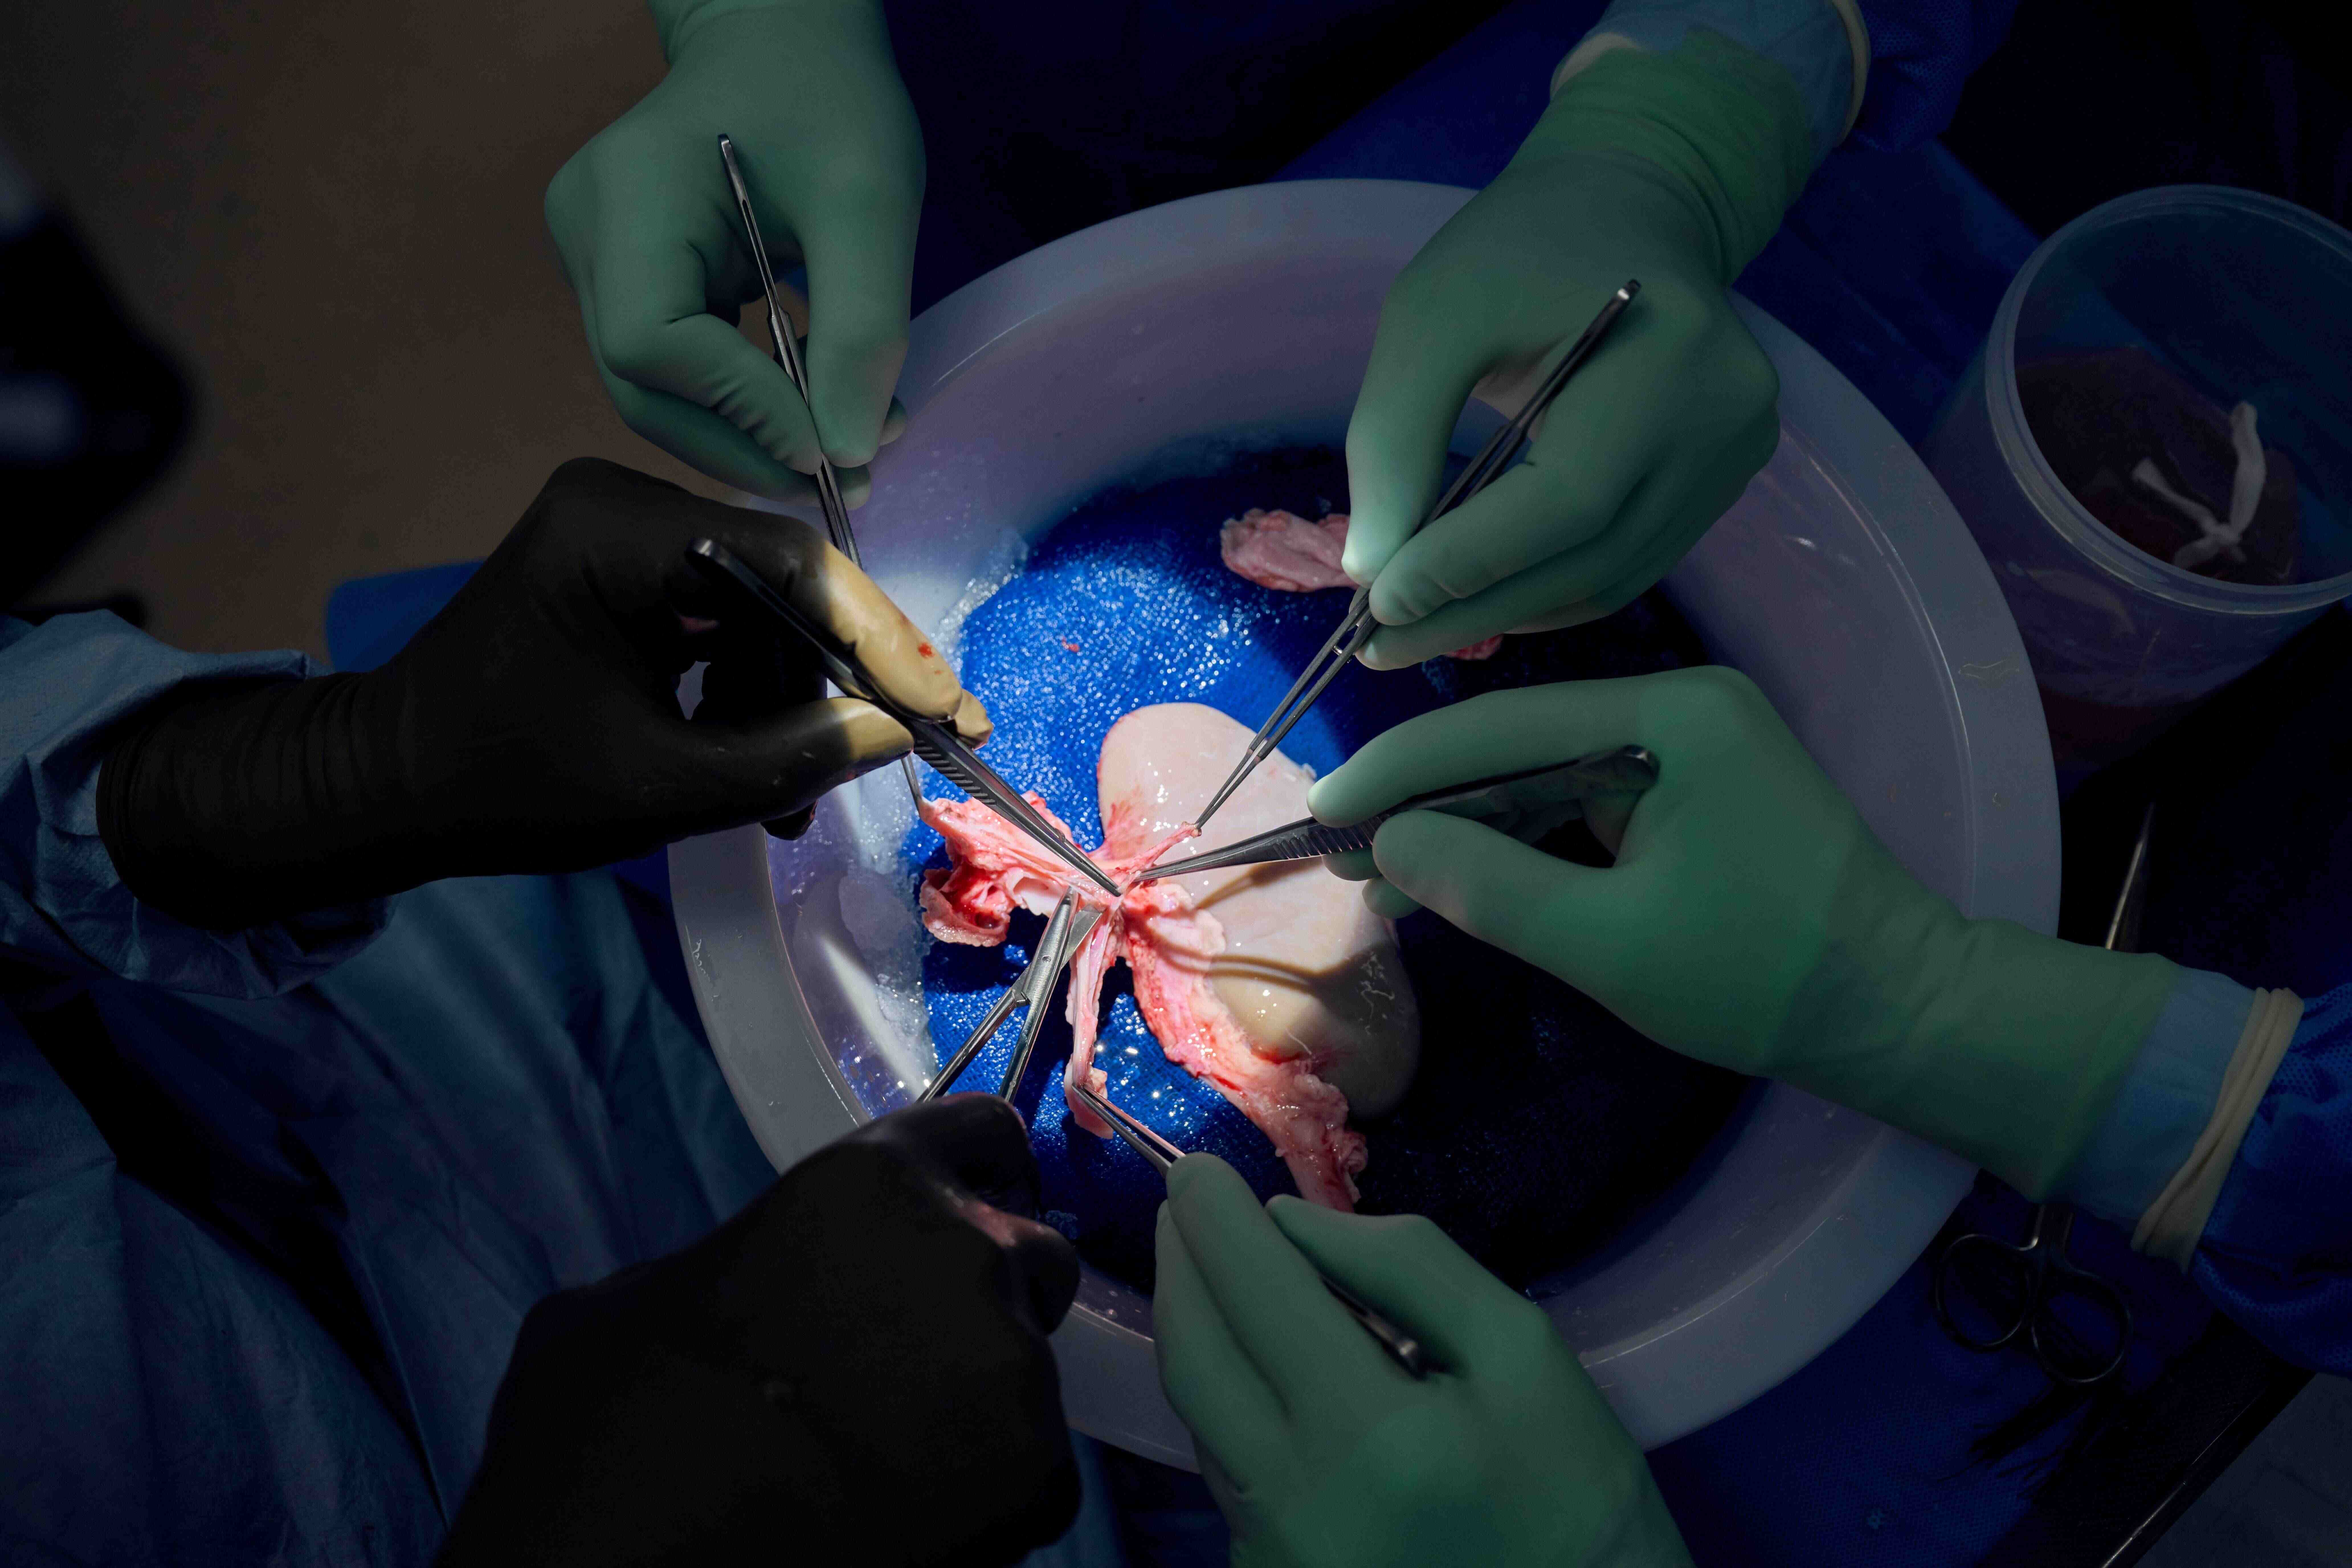 Tissue from the pig kidney is examined and removed in preparation for transplant. Credit: Joe Carrotta for NYU Langone Health